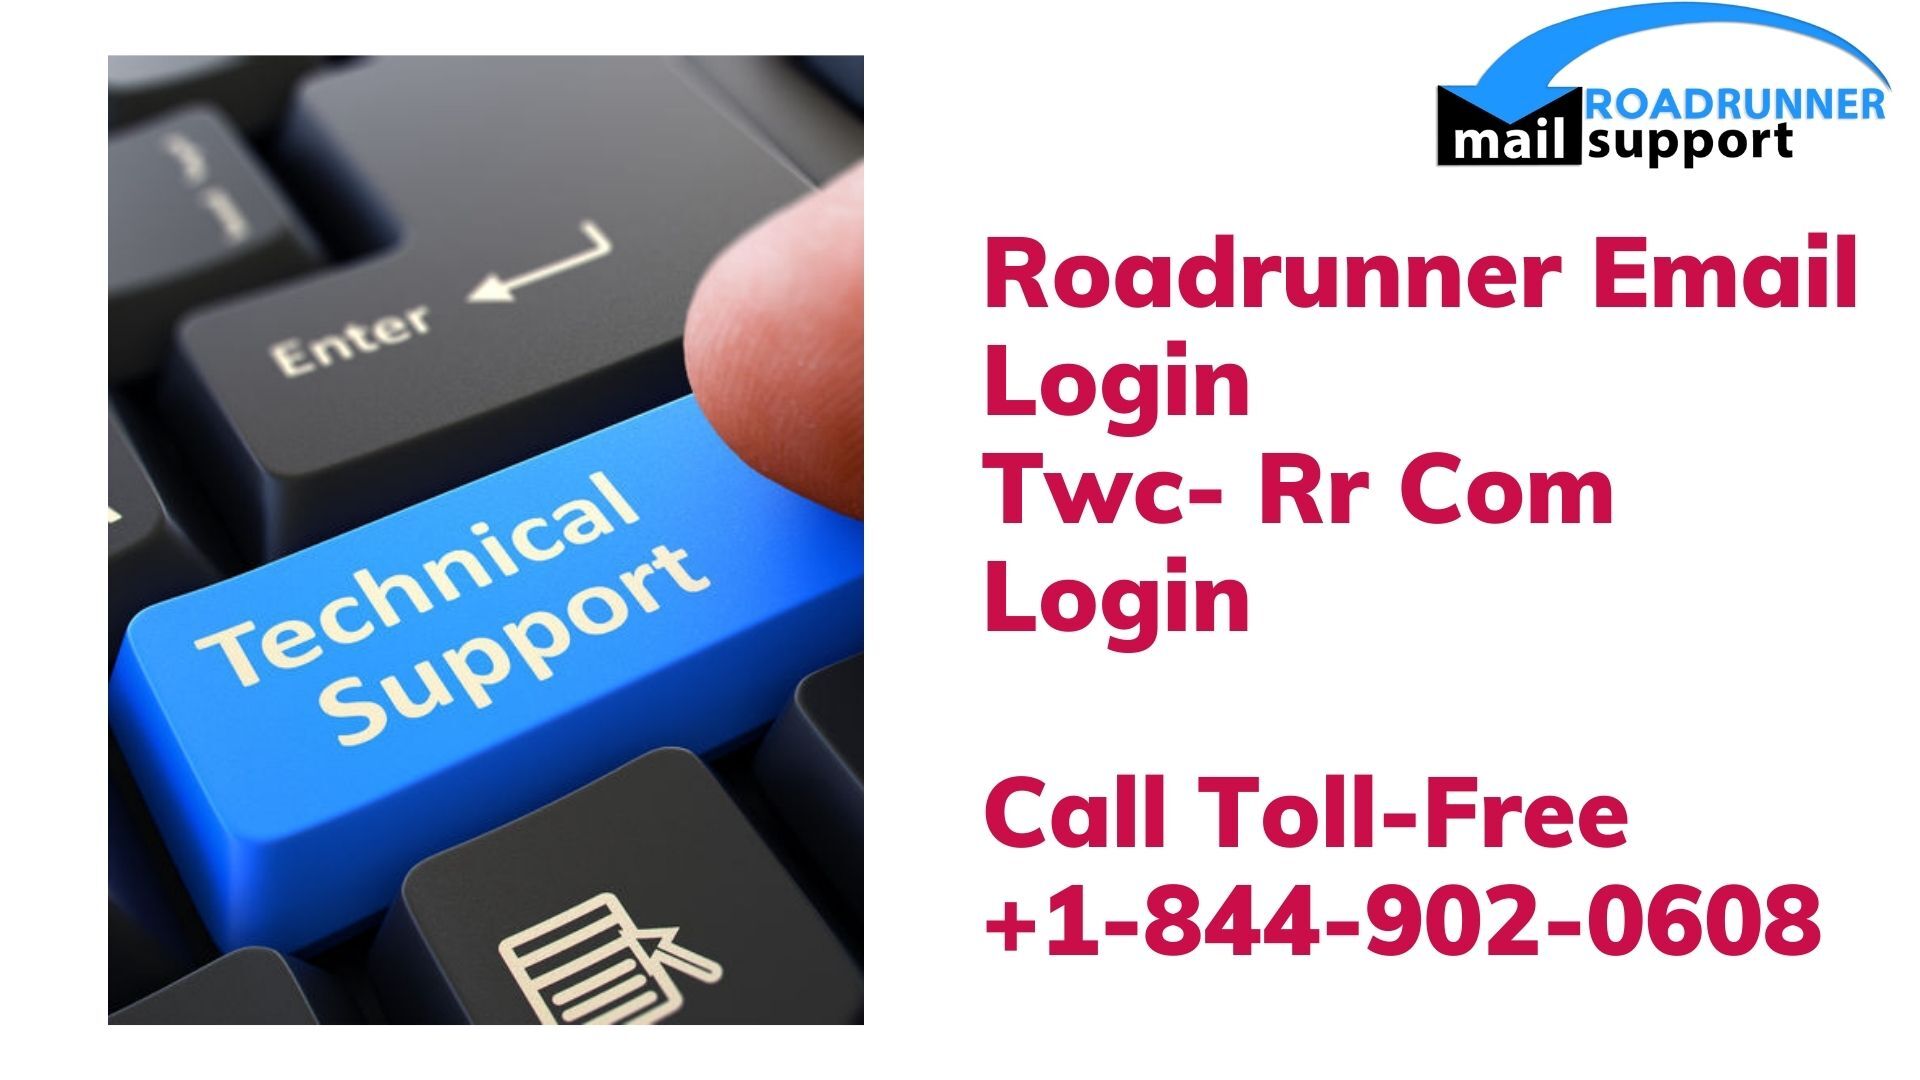 Roadrunner Email Login to access TWC Email Account